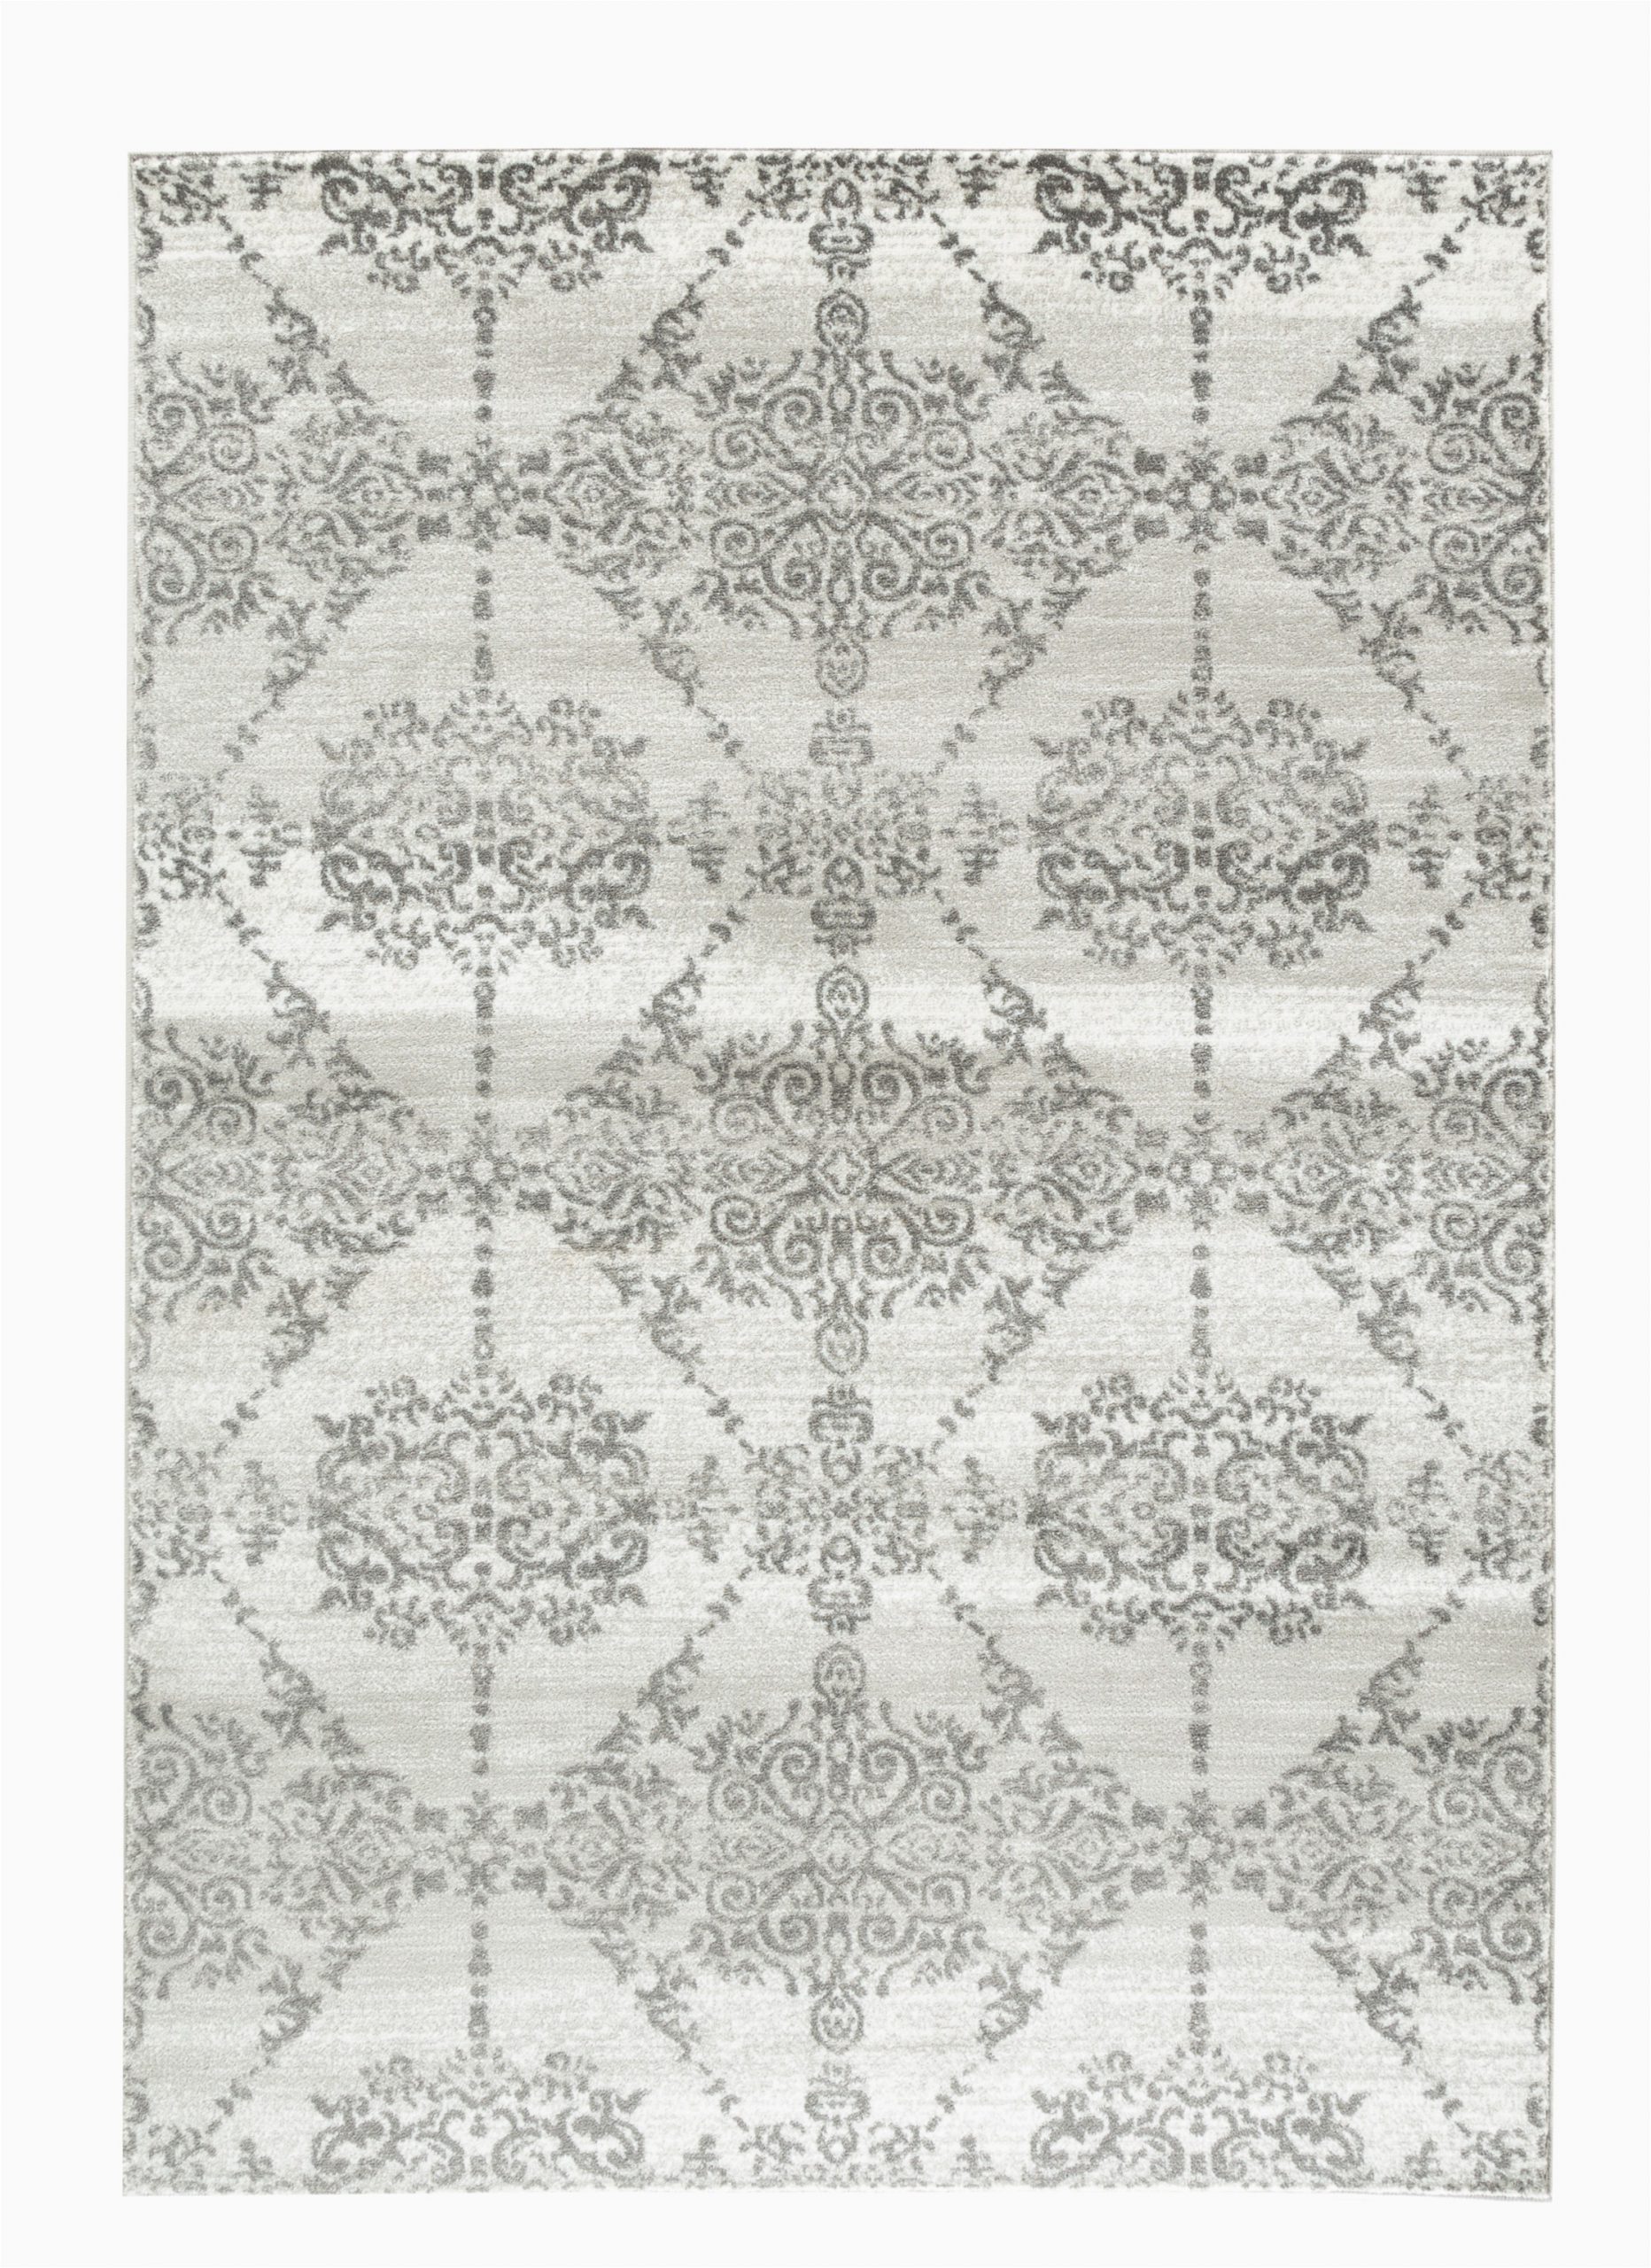 Black and White area Rugs Walmart Summit Collection Traditional Pattern Gray area Rug